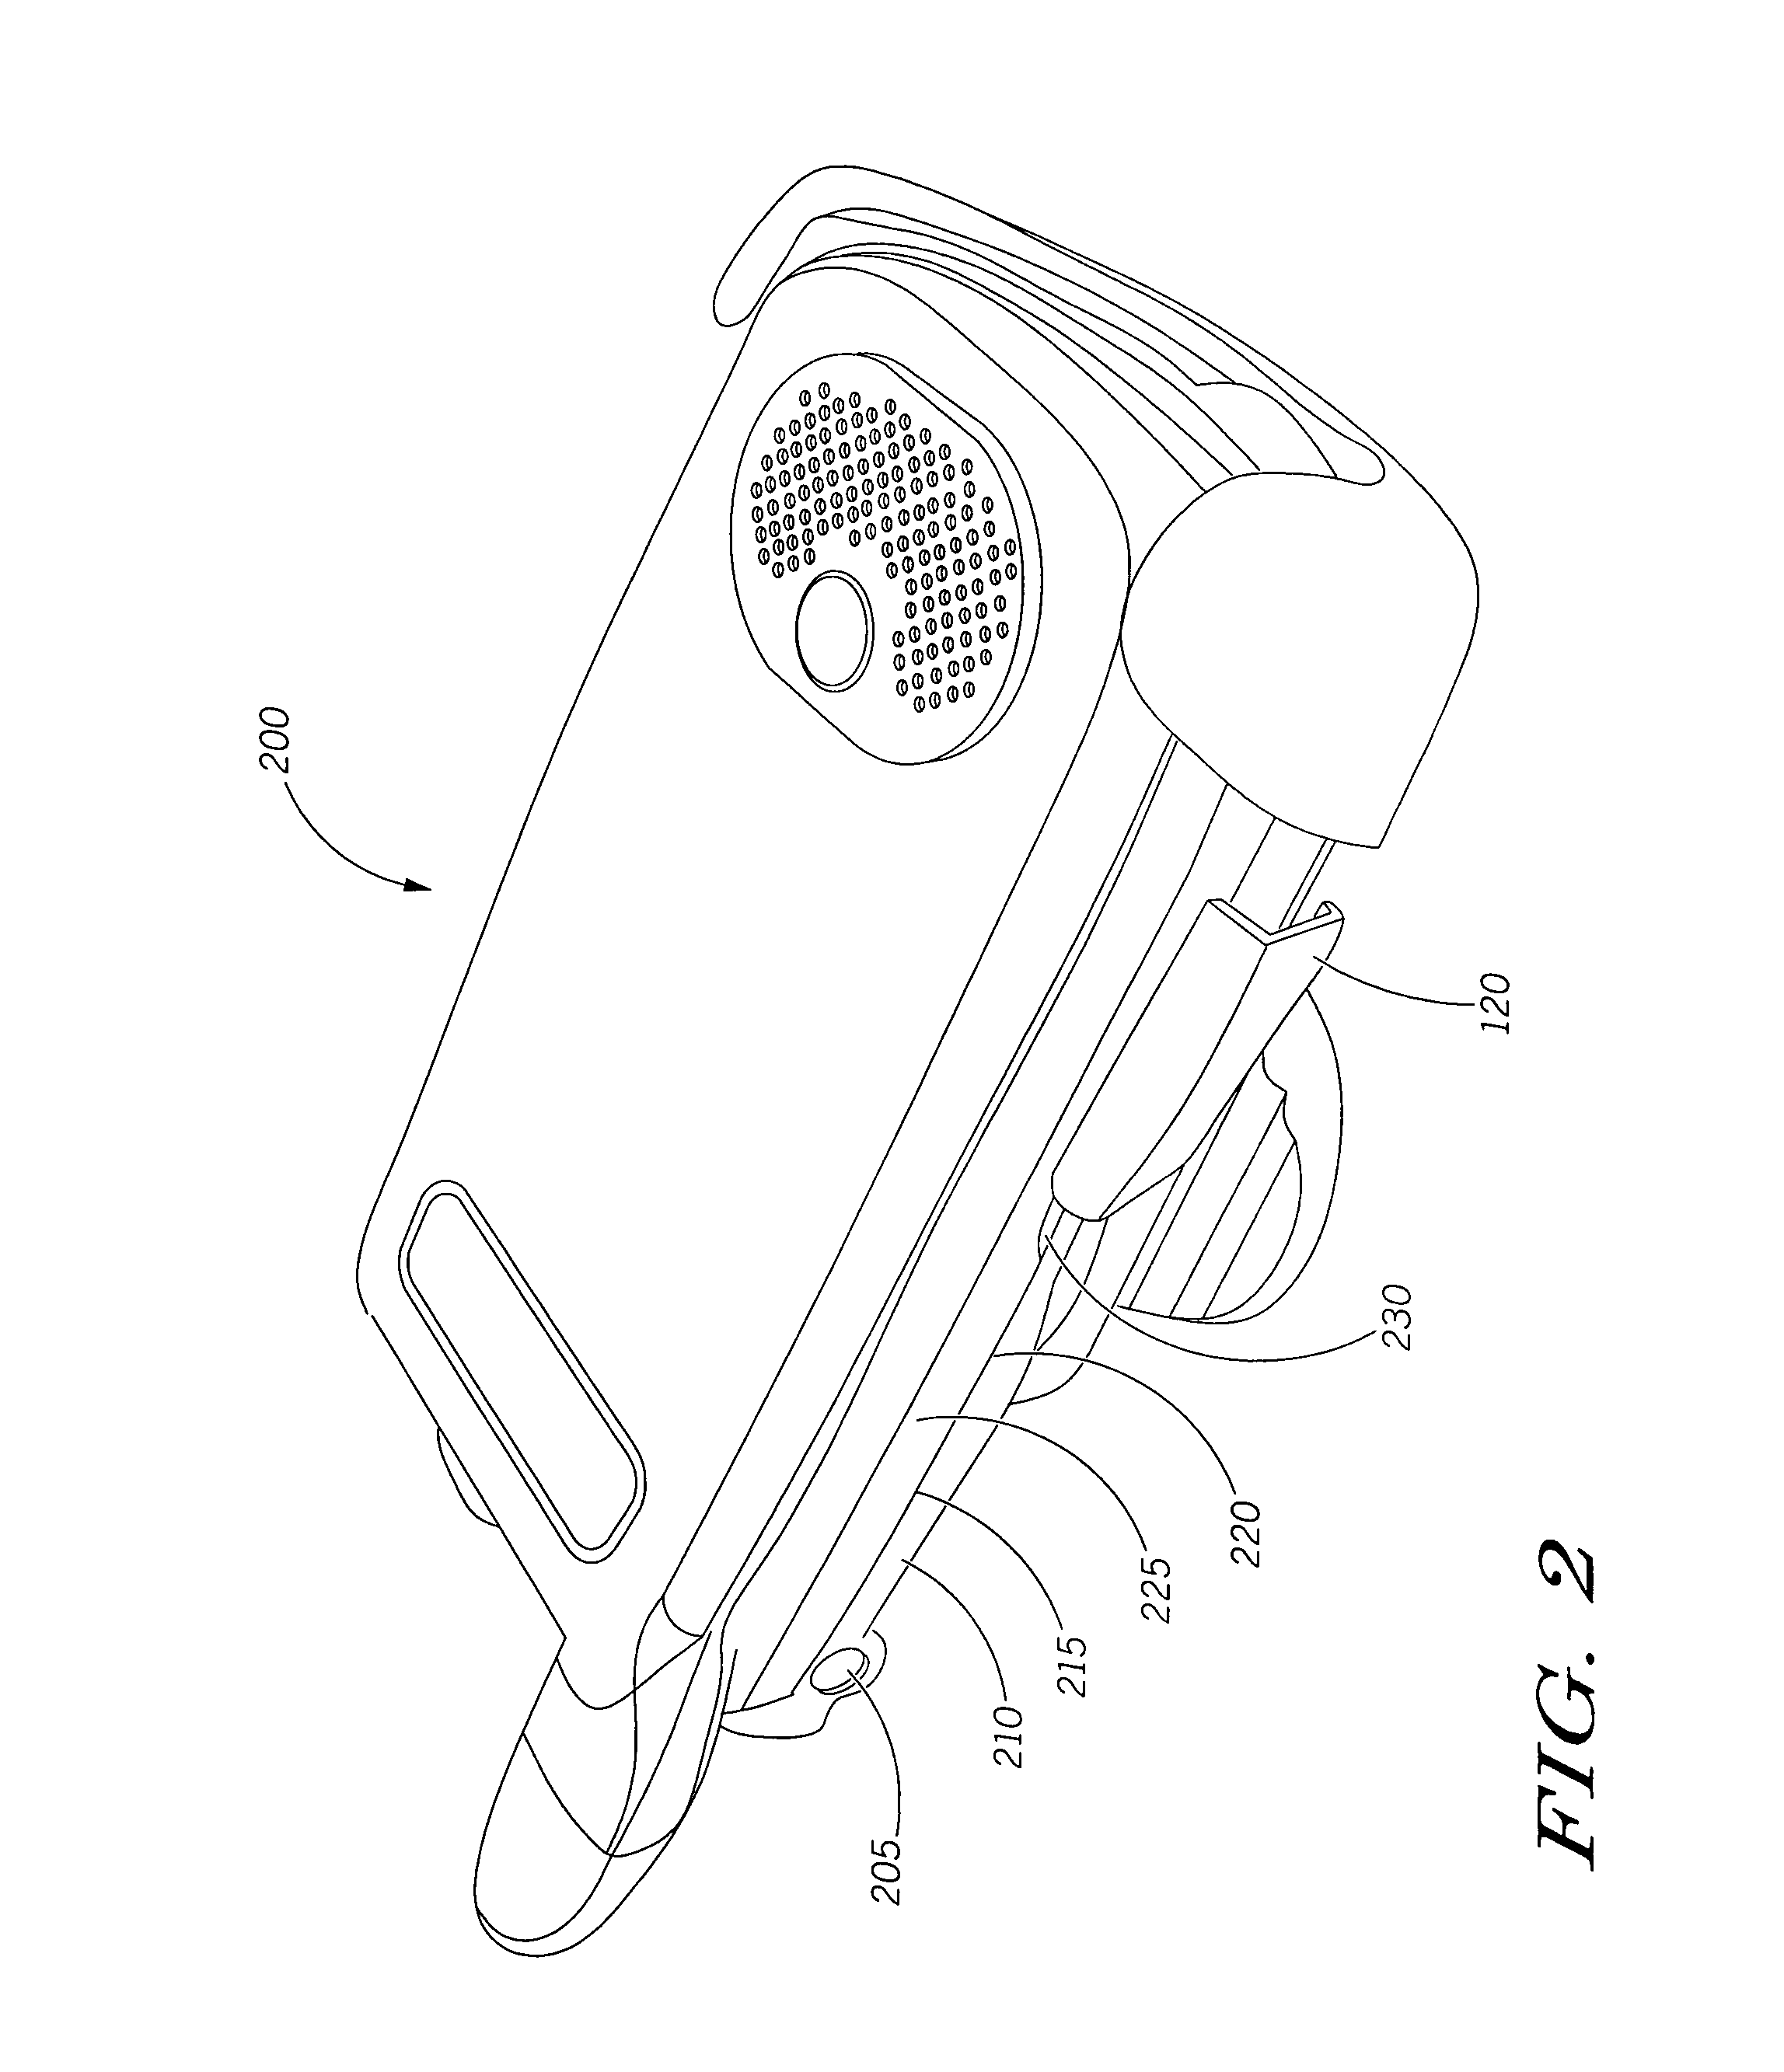 Mobile electronic device carrier allowing selective opening of the electronic device